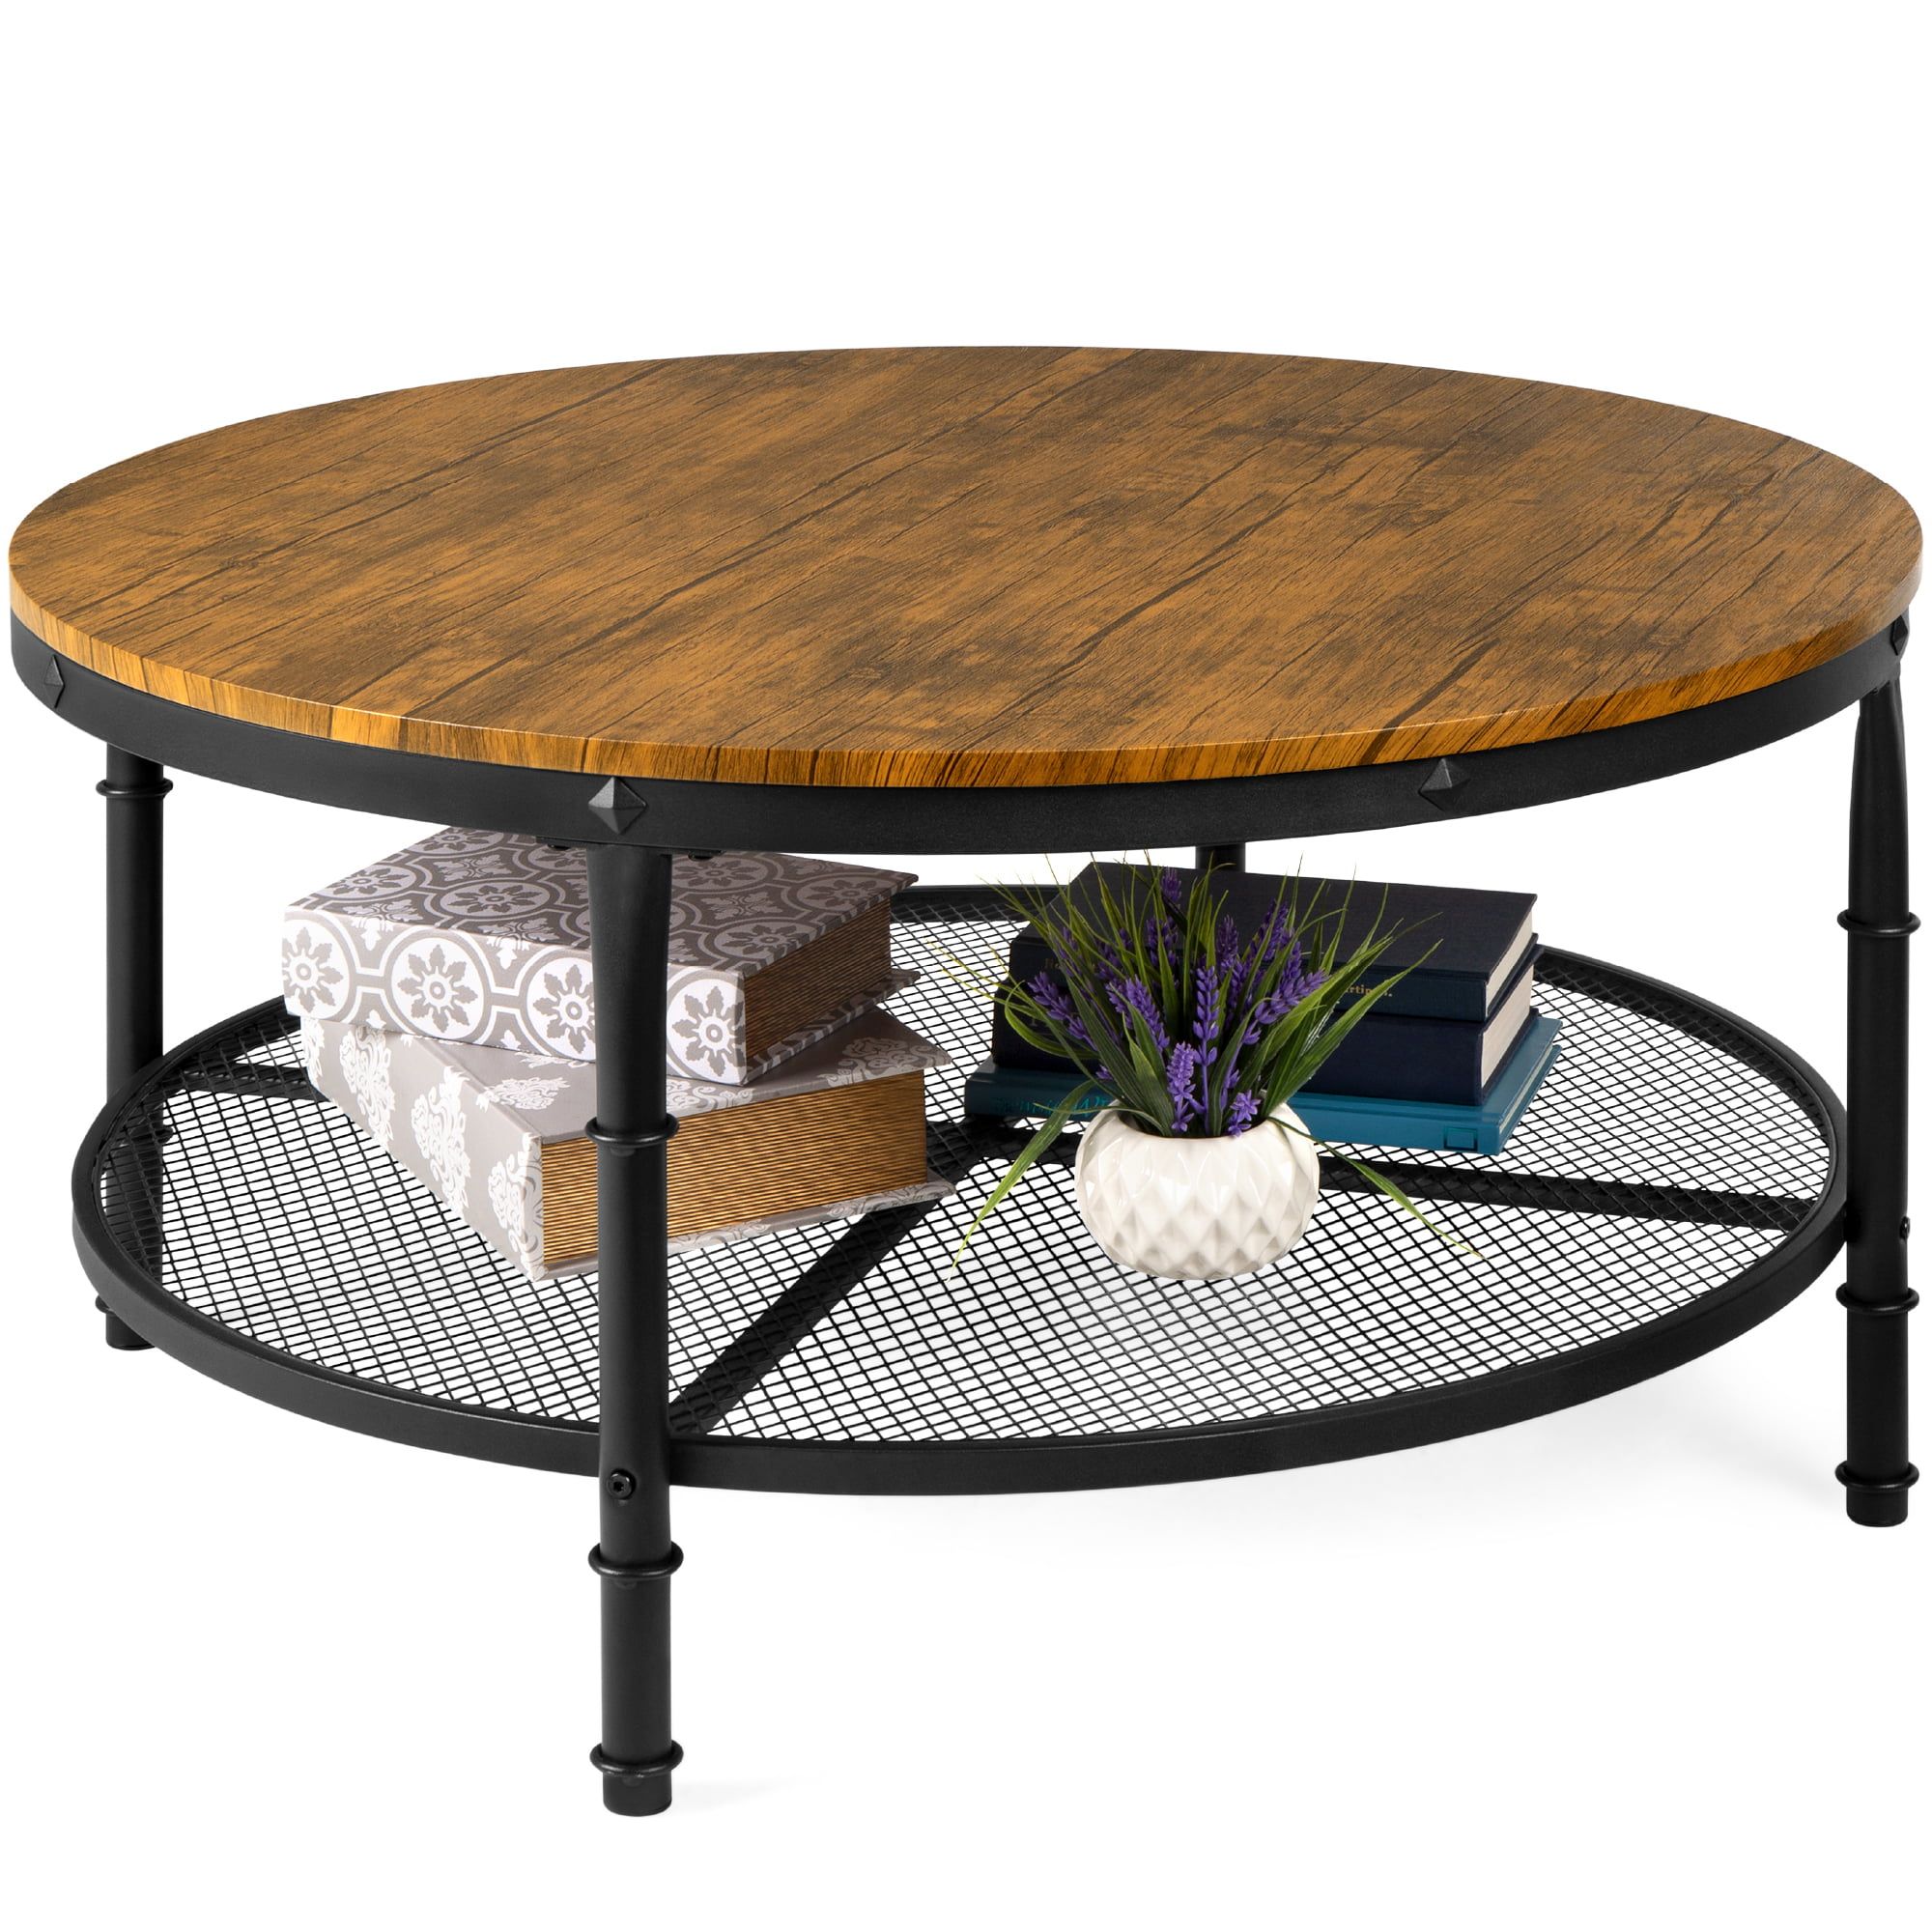 Best Choice Products 2 Tier Round Coffee Table, Rustic Steel Accent Inside Round Coffee Tables With Steel Frames (View 10 of 15)